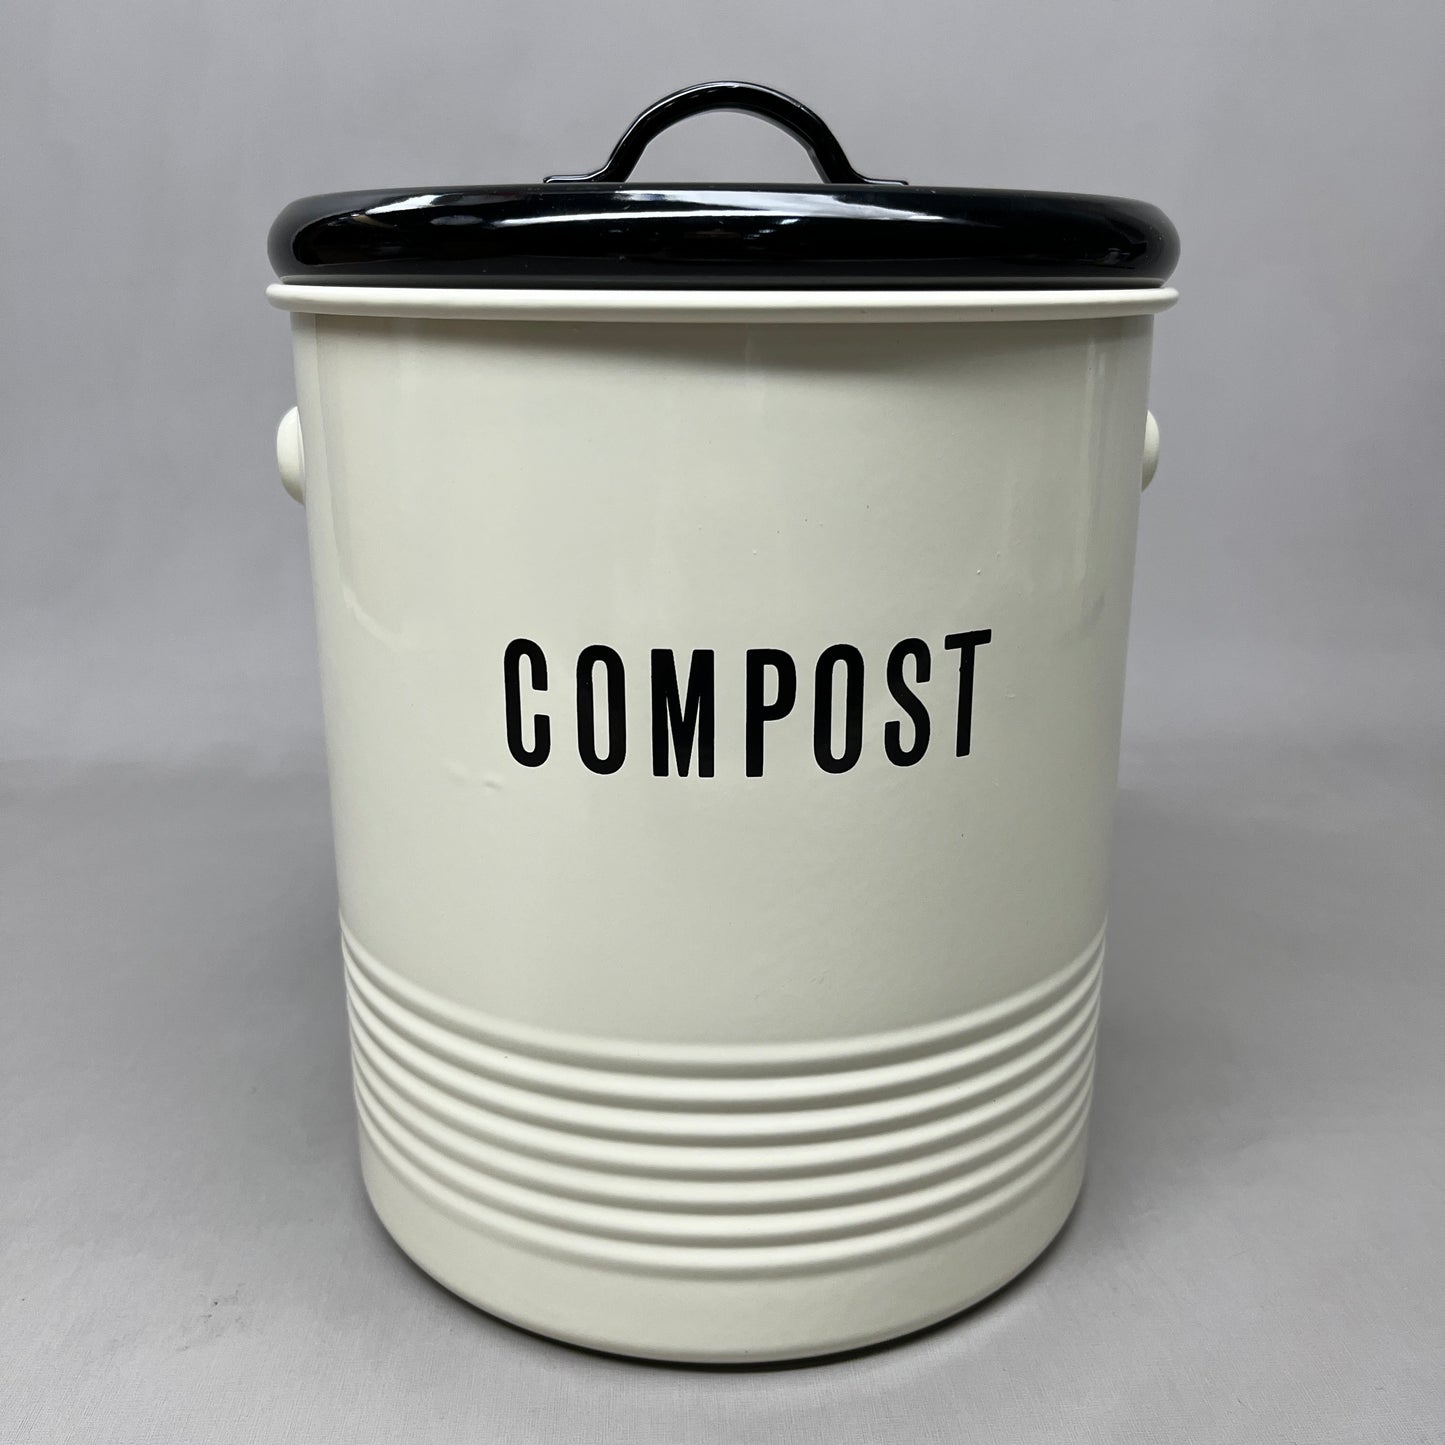 NOW DESIGNS Compost Bin Vintage Filter Included 7" x 8 1/2" Beige 5123002 (New Other)